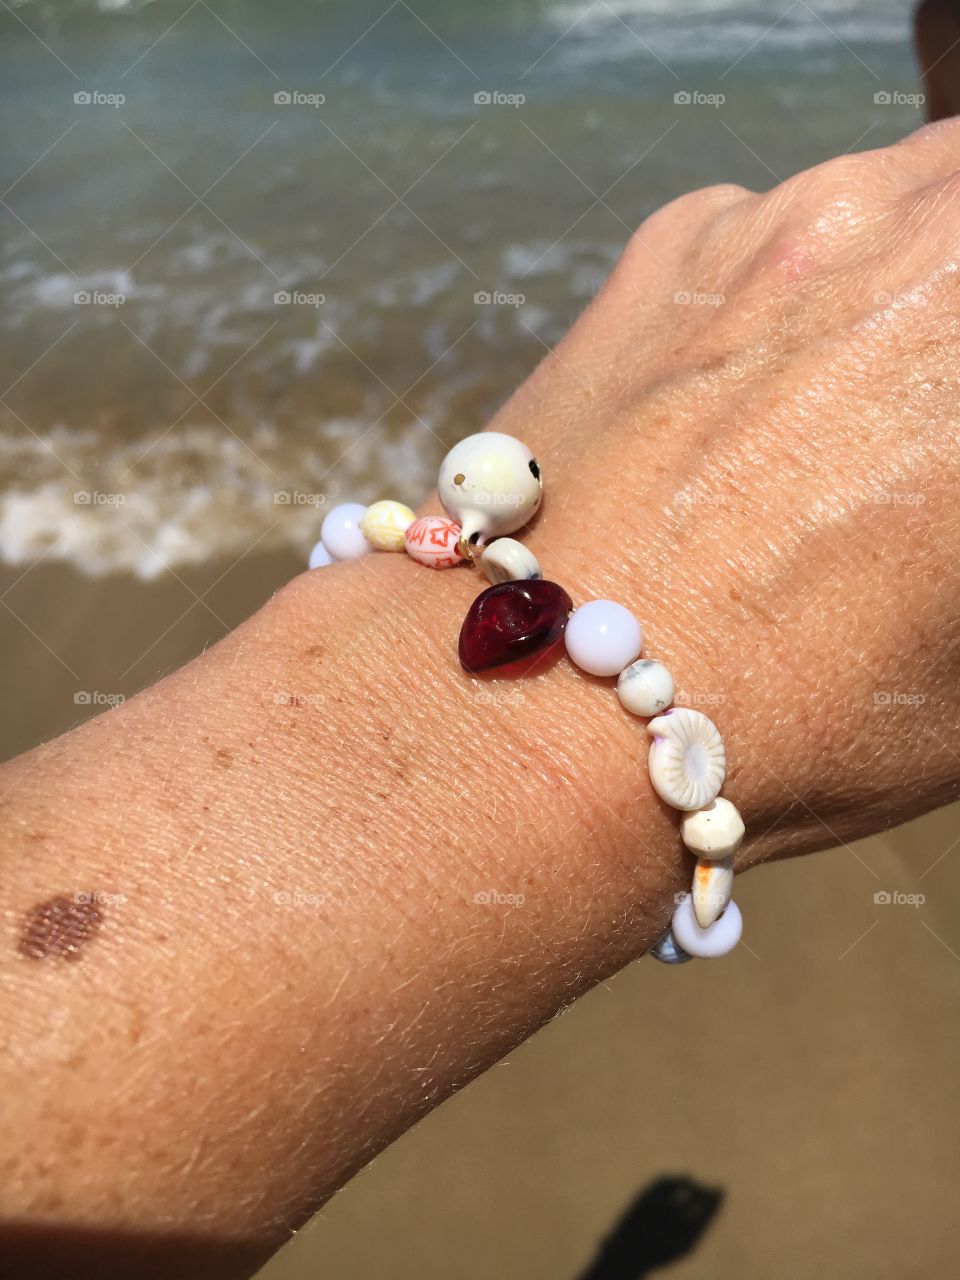 BRACLET by the sea